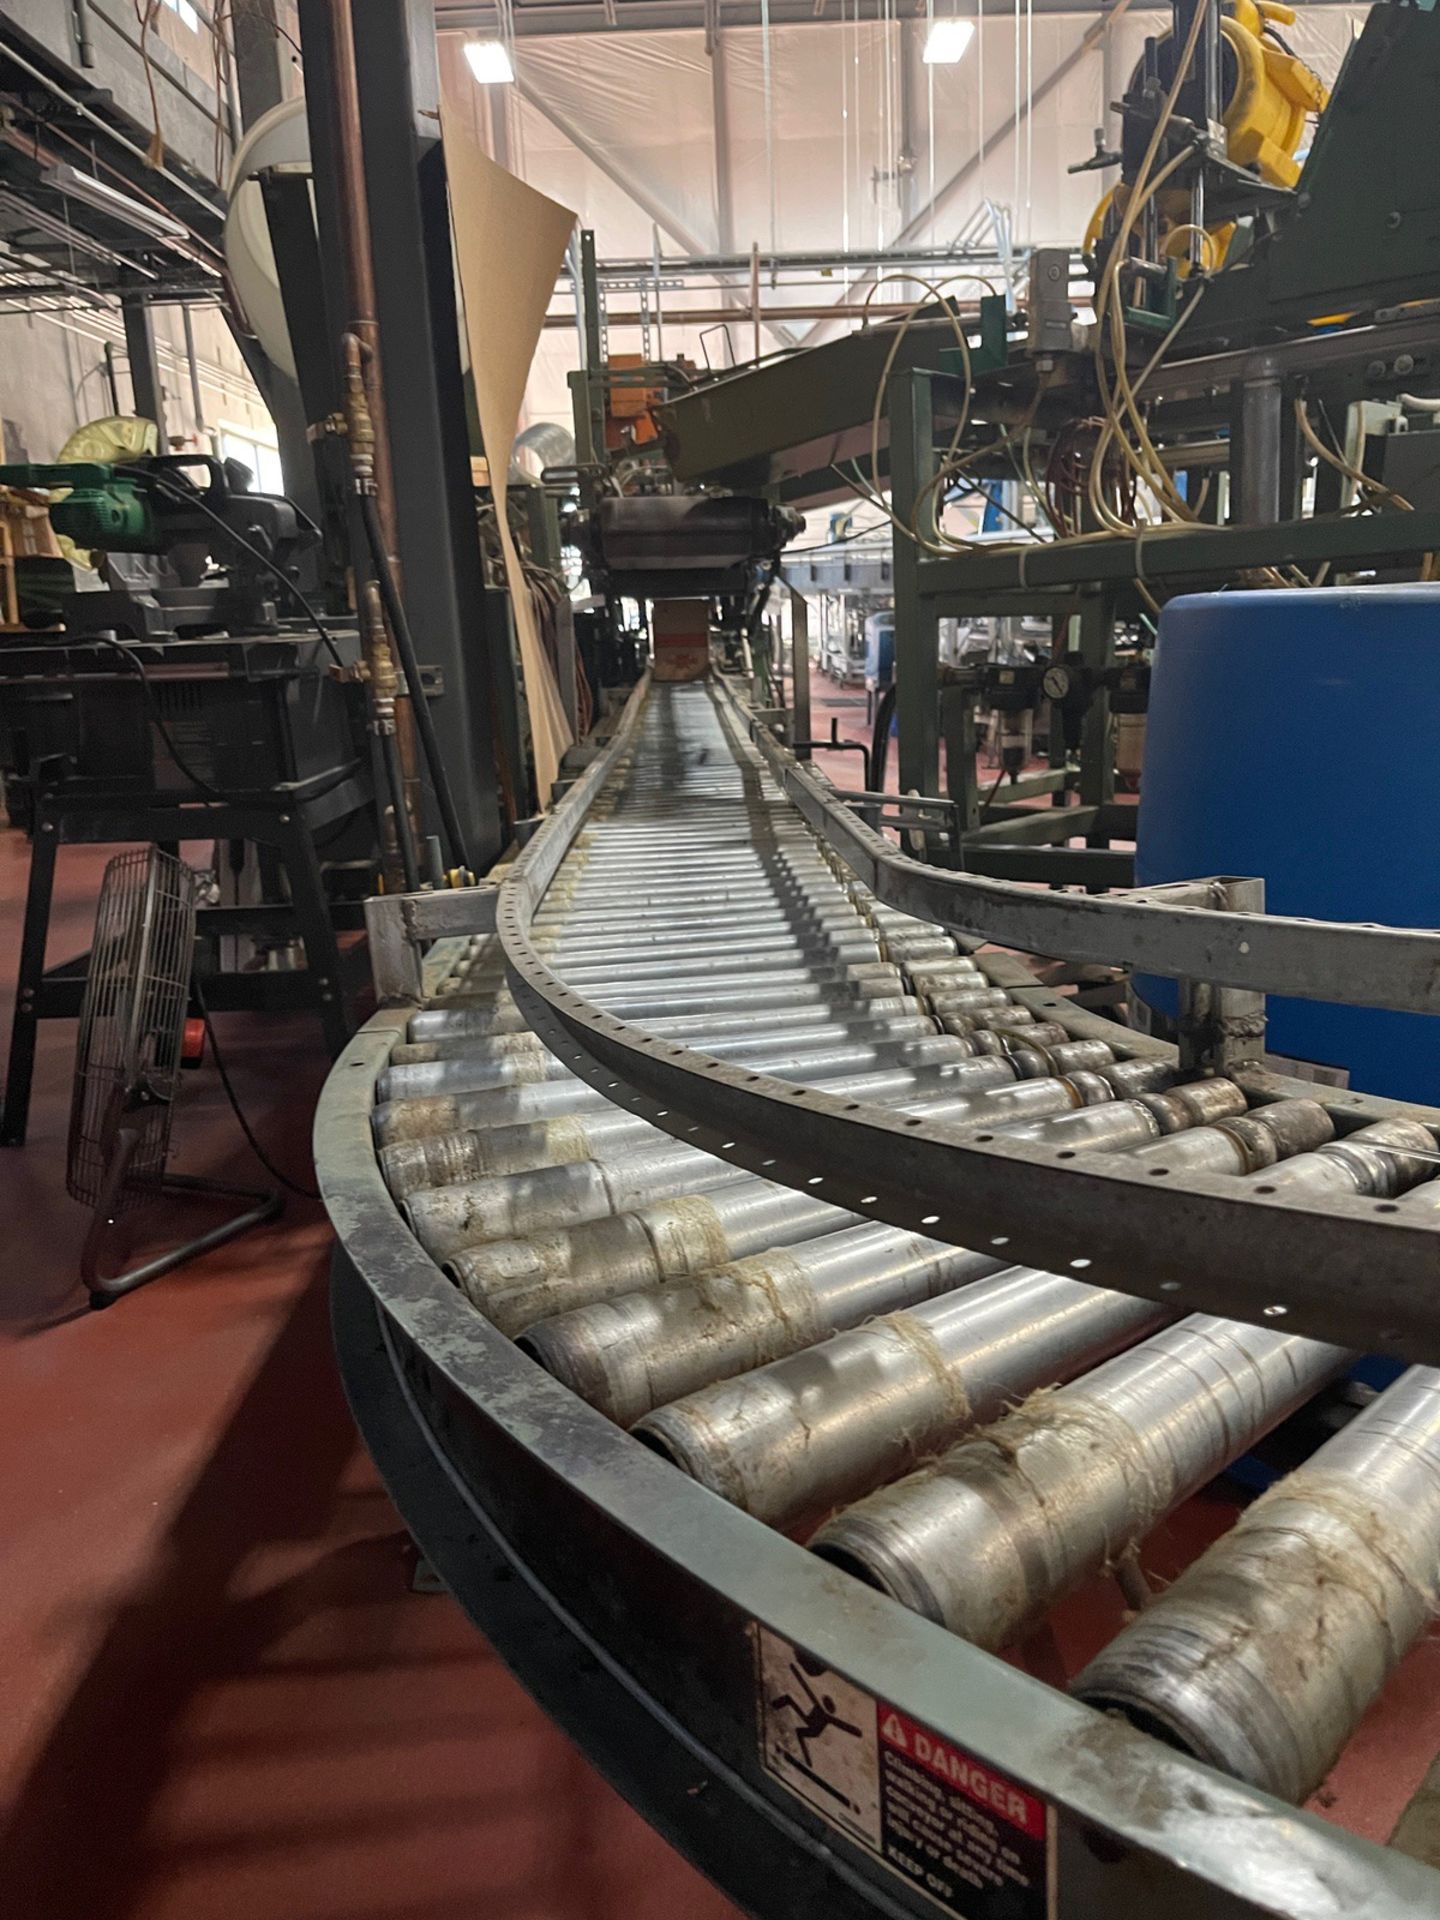 Hytrol Steel Roller Case Conveyor with J-shaped curve, Approx. 29' run with 21" rol | Rig Fee $300 - Image 3 of 3